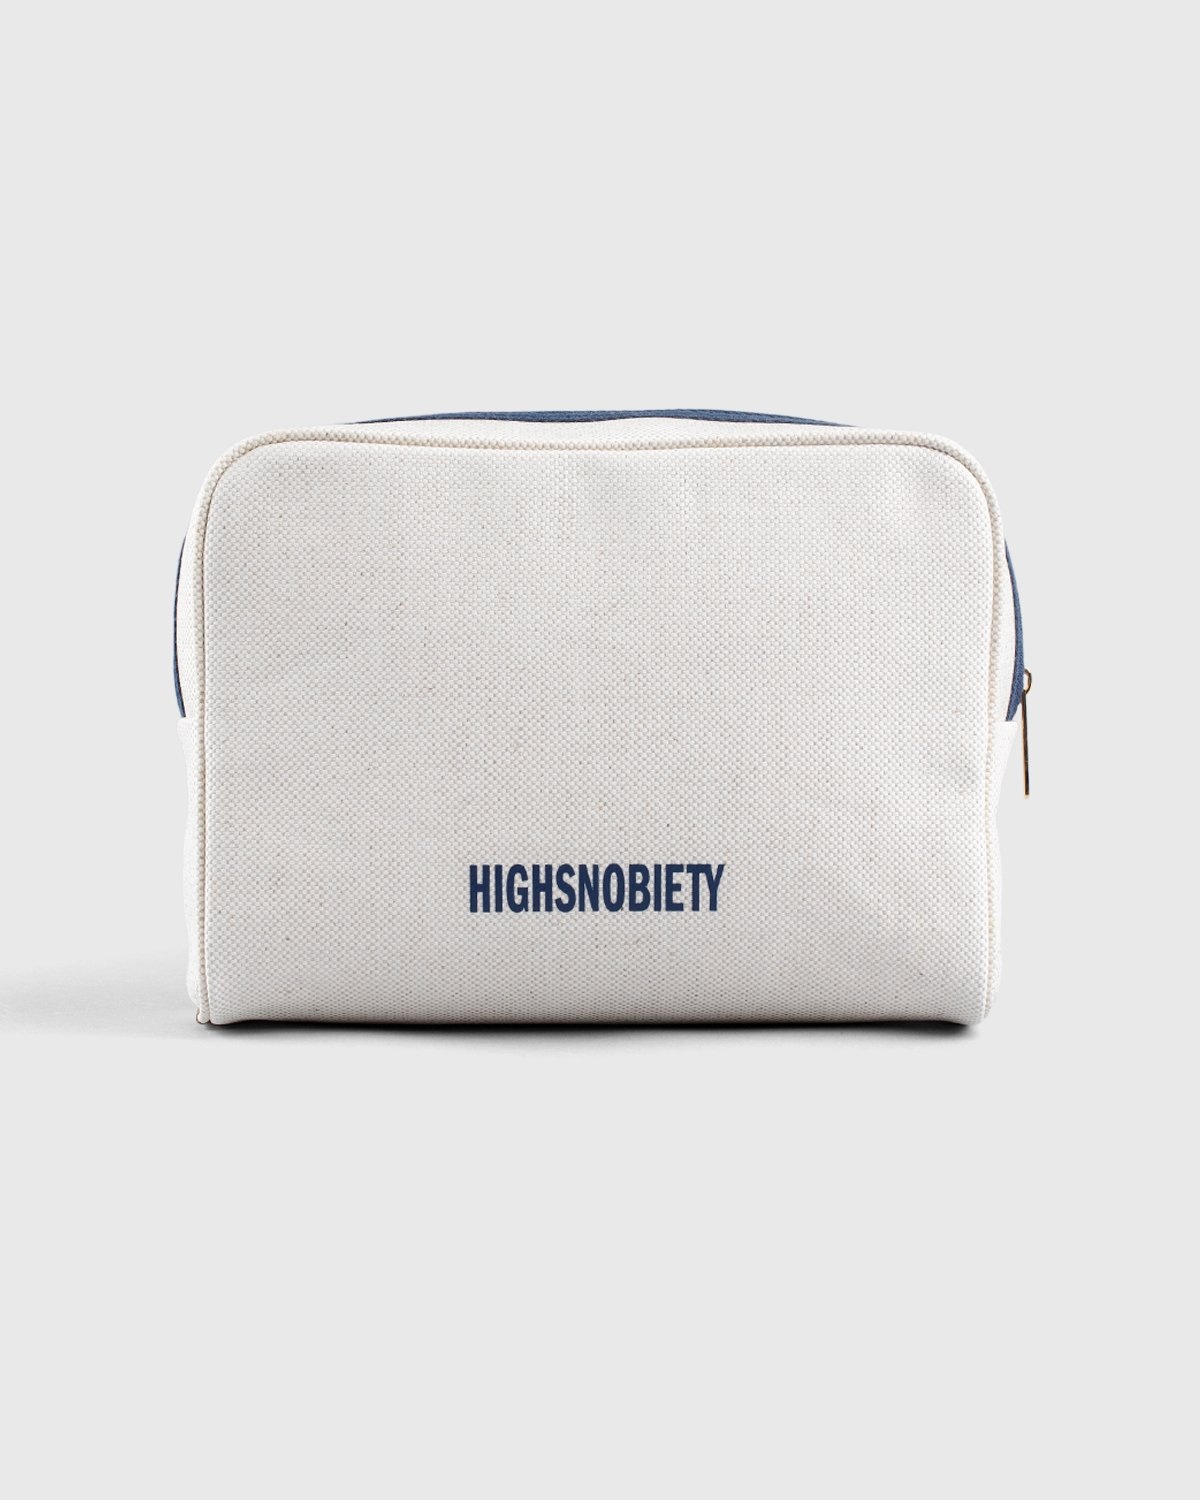 L/UNIFORM x Highsnobiety – Toiletry Bag - Cosmetic Cases - Beige - Image 2